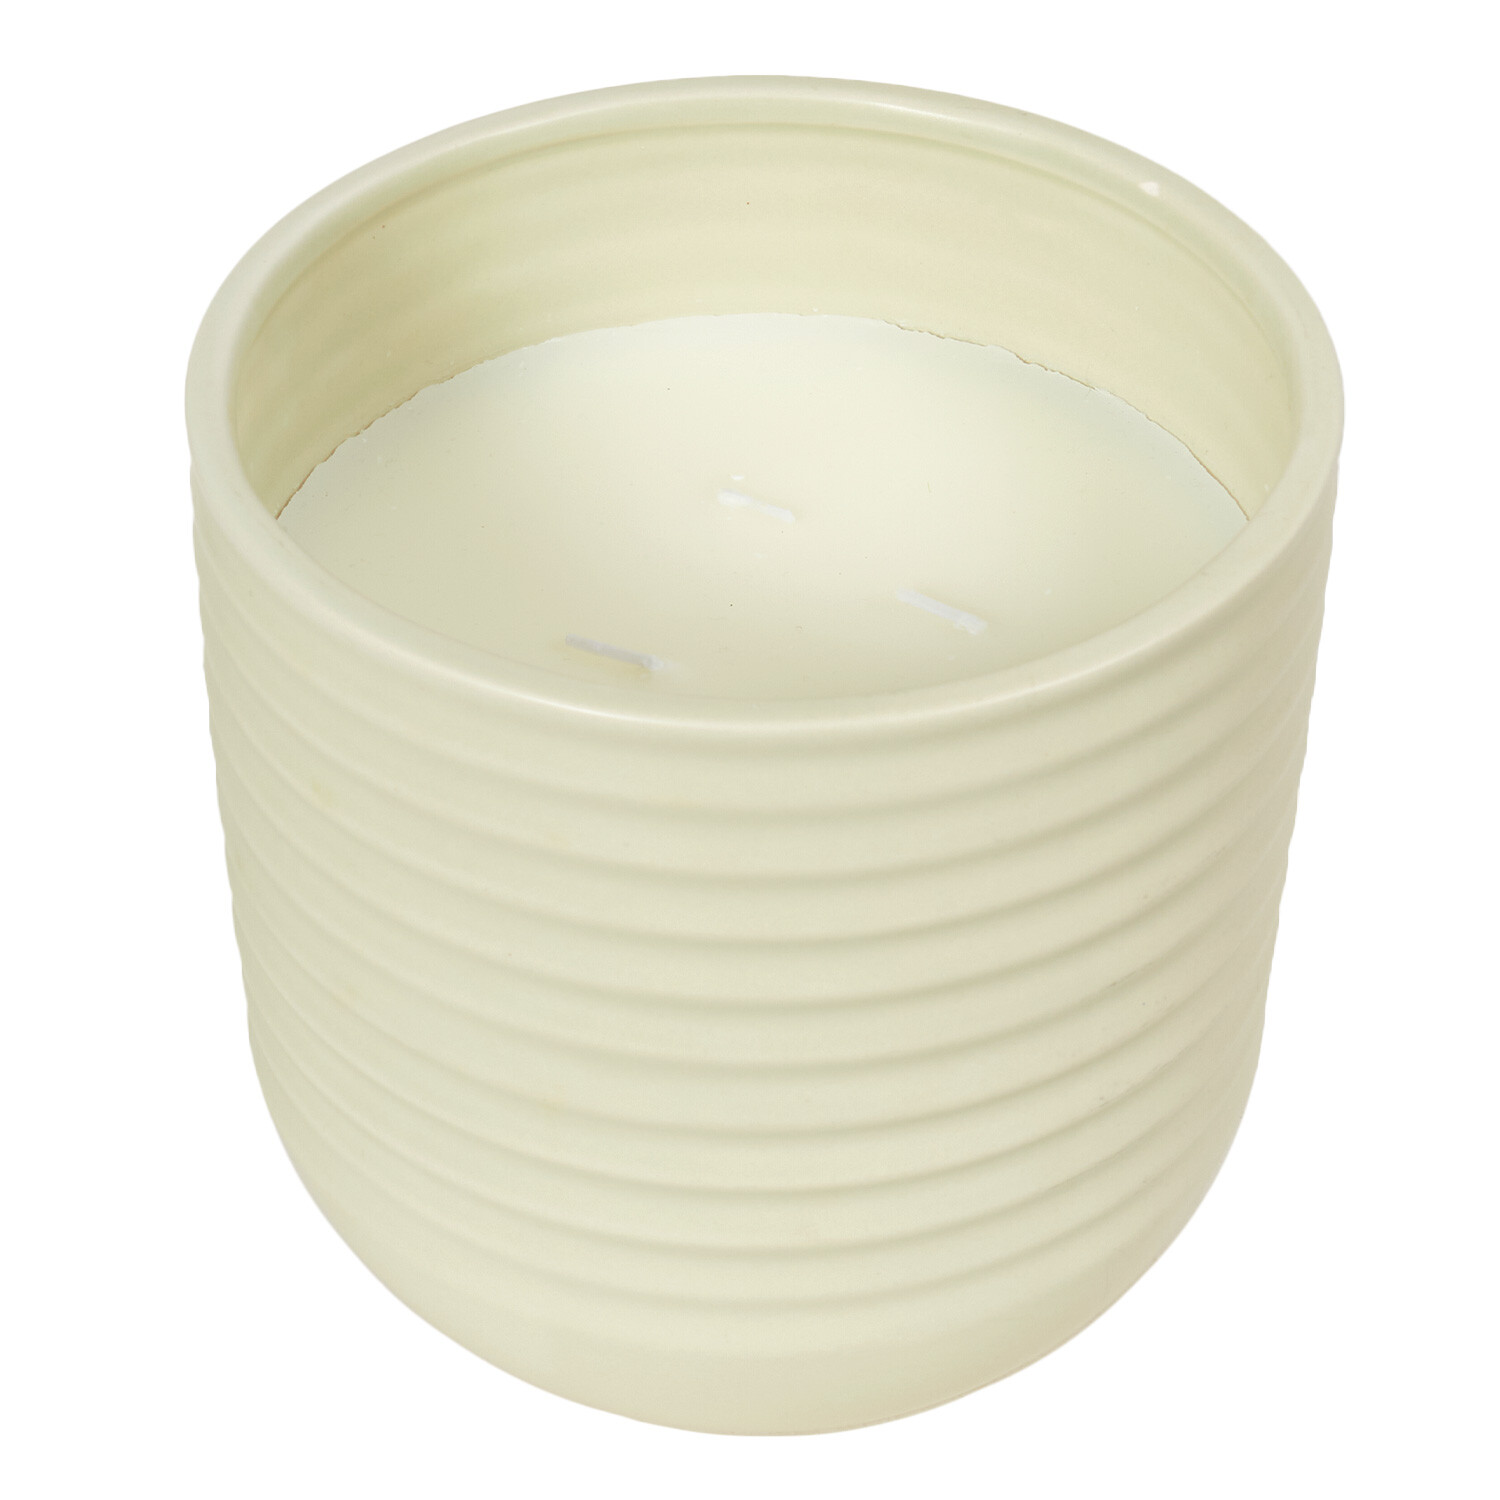 Large Ribbed Citronella Candle - Cream Image 2